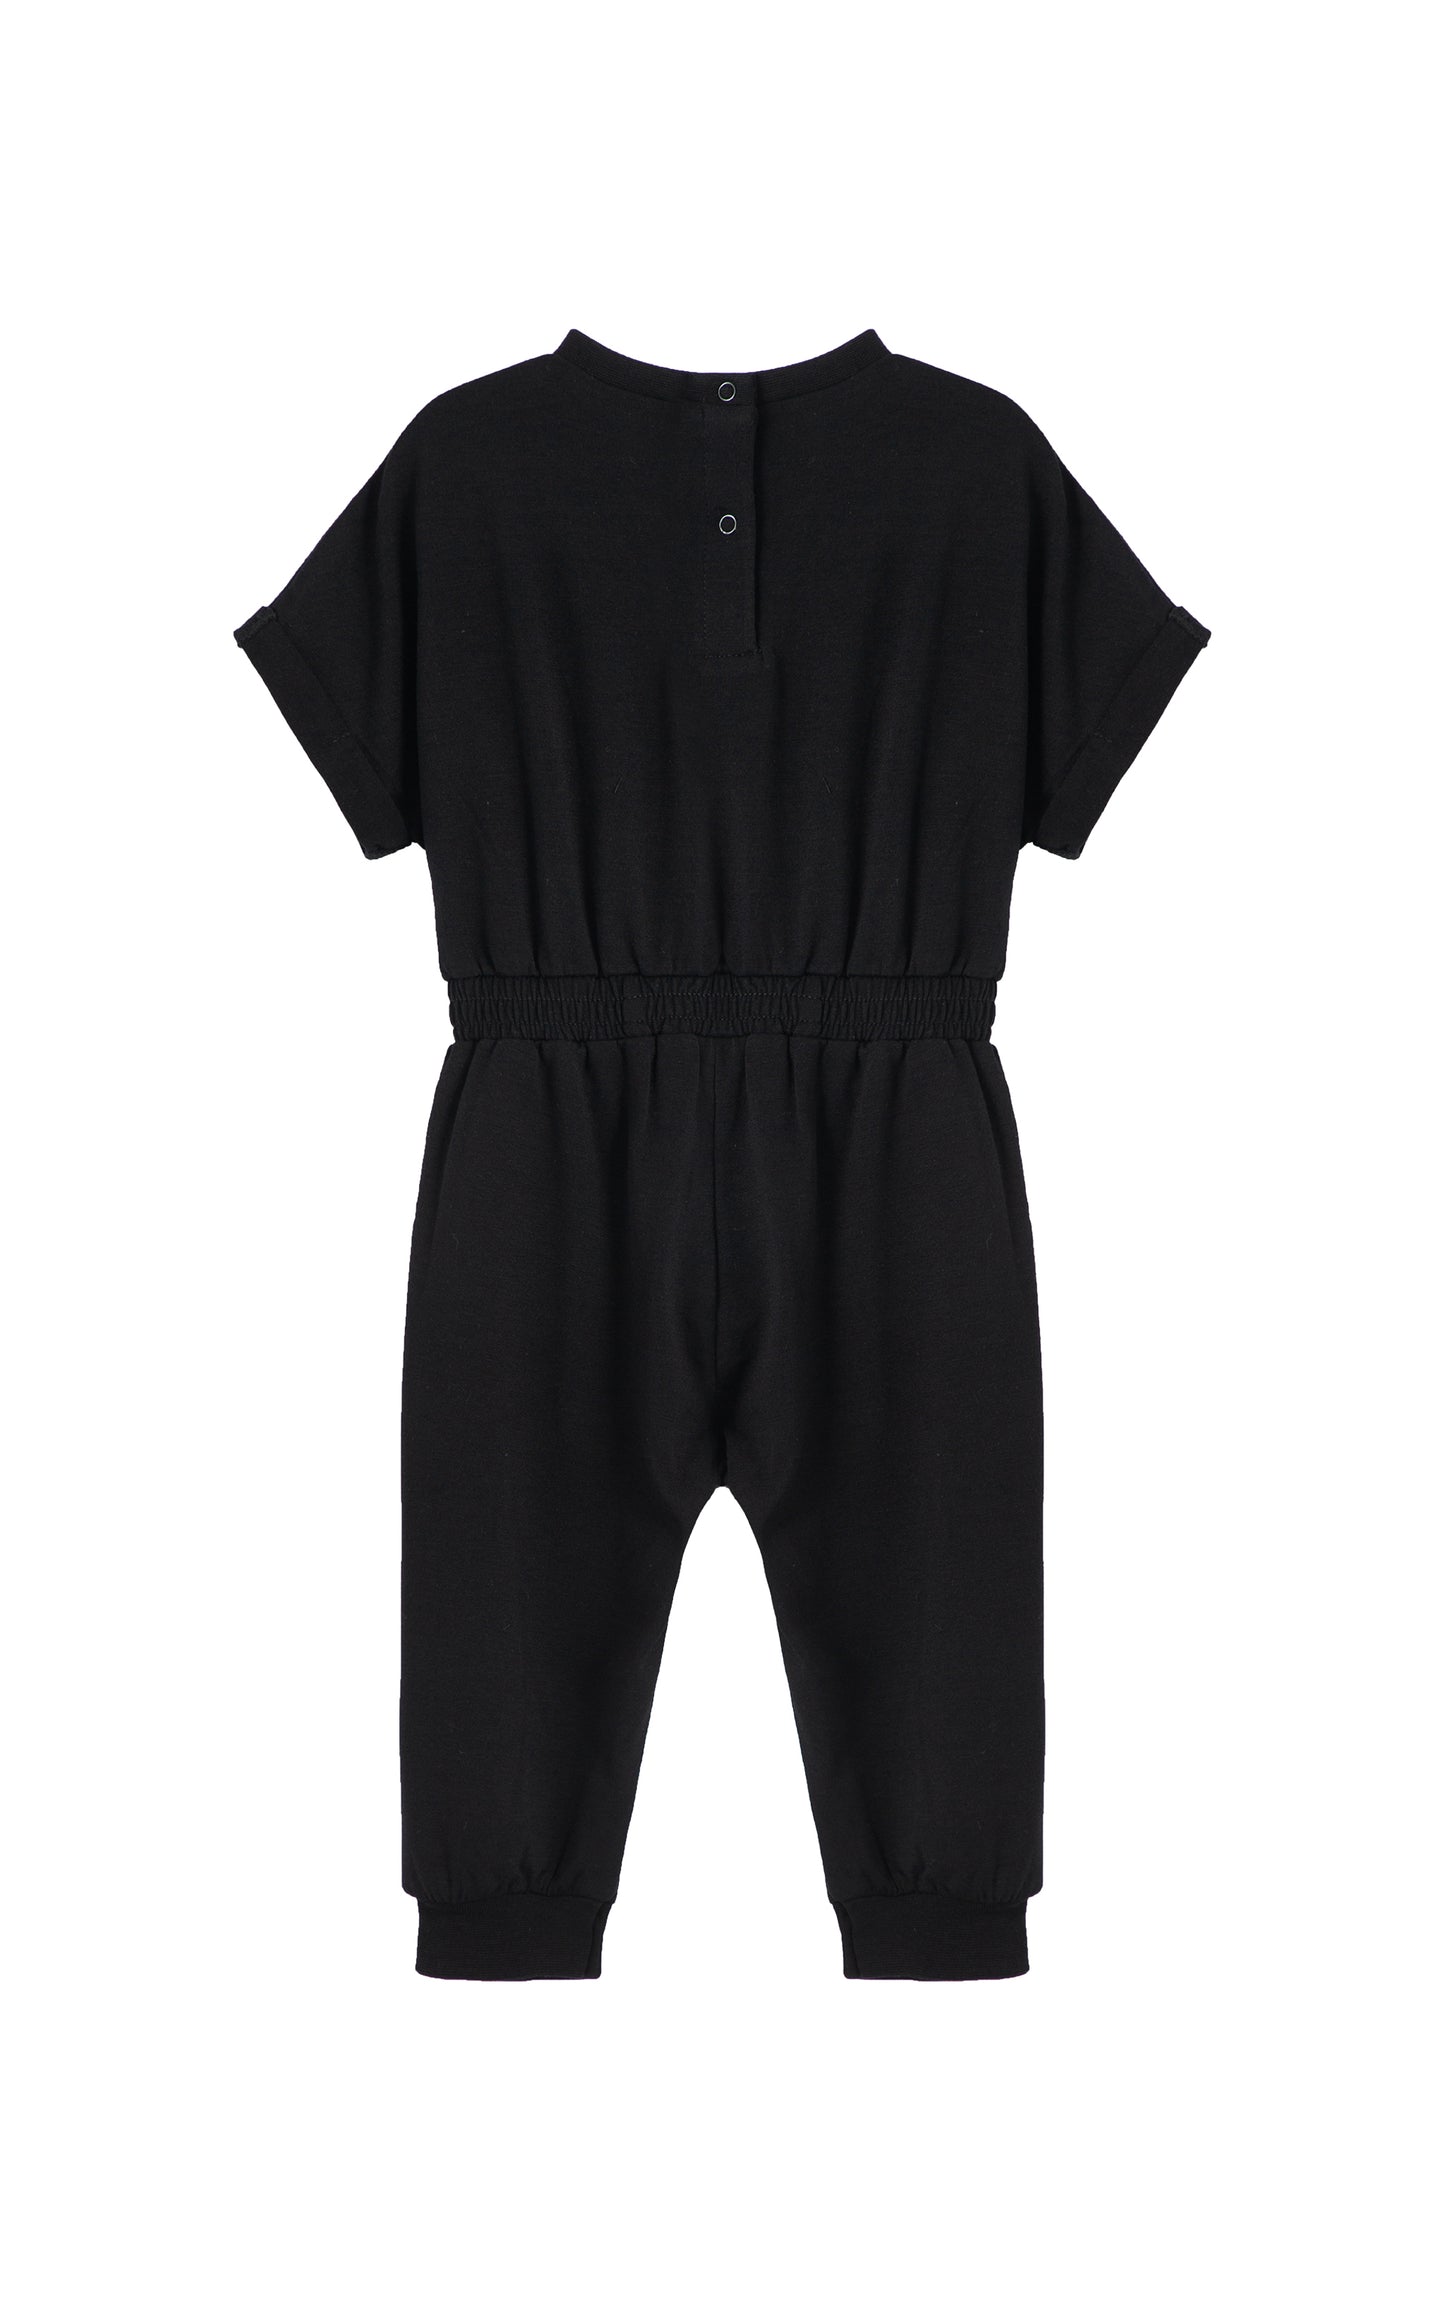 Back view of black romper with folded cuff sleeves.